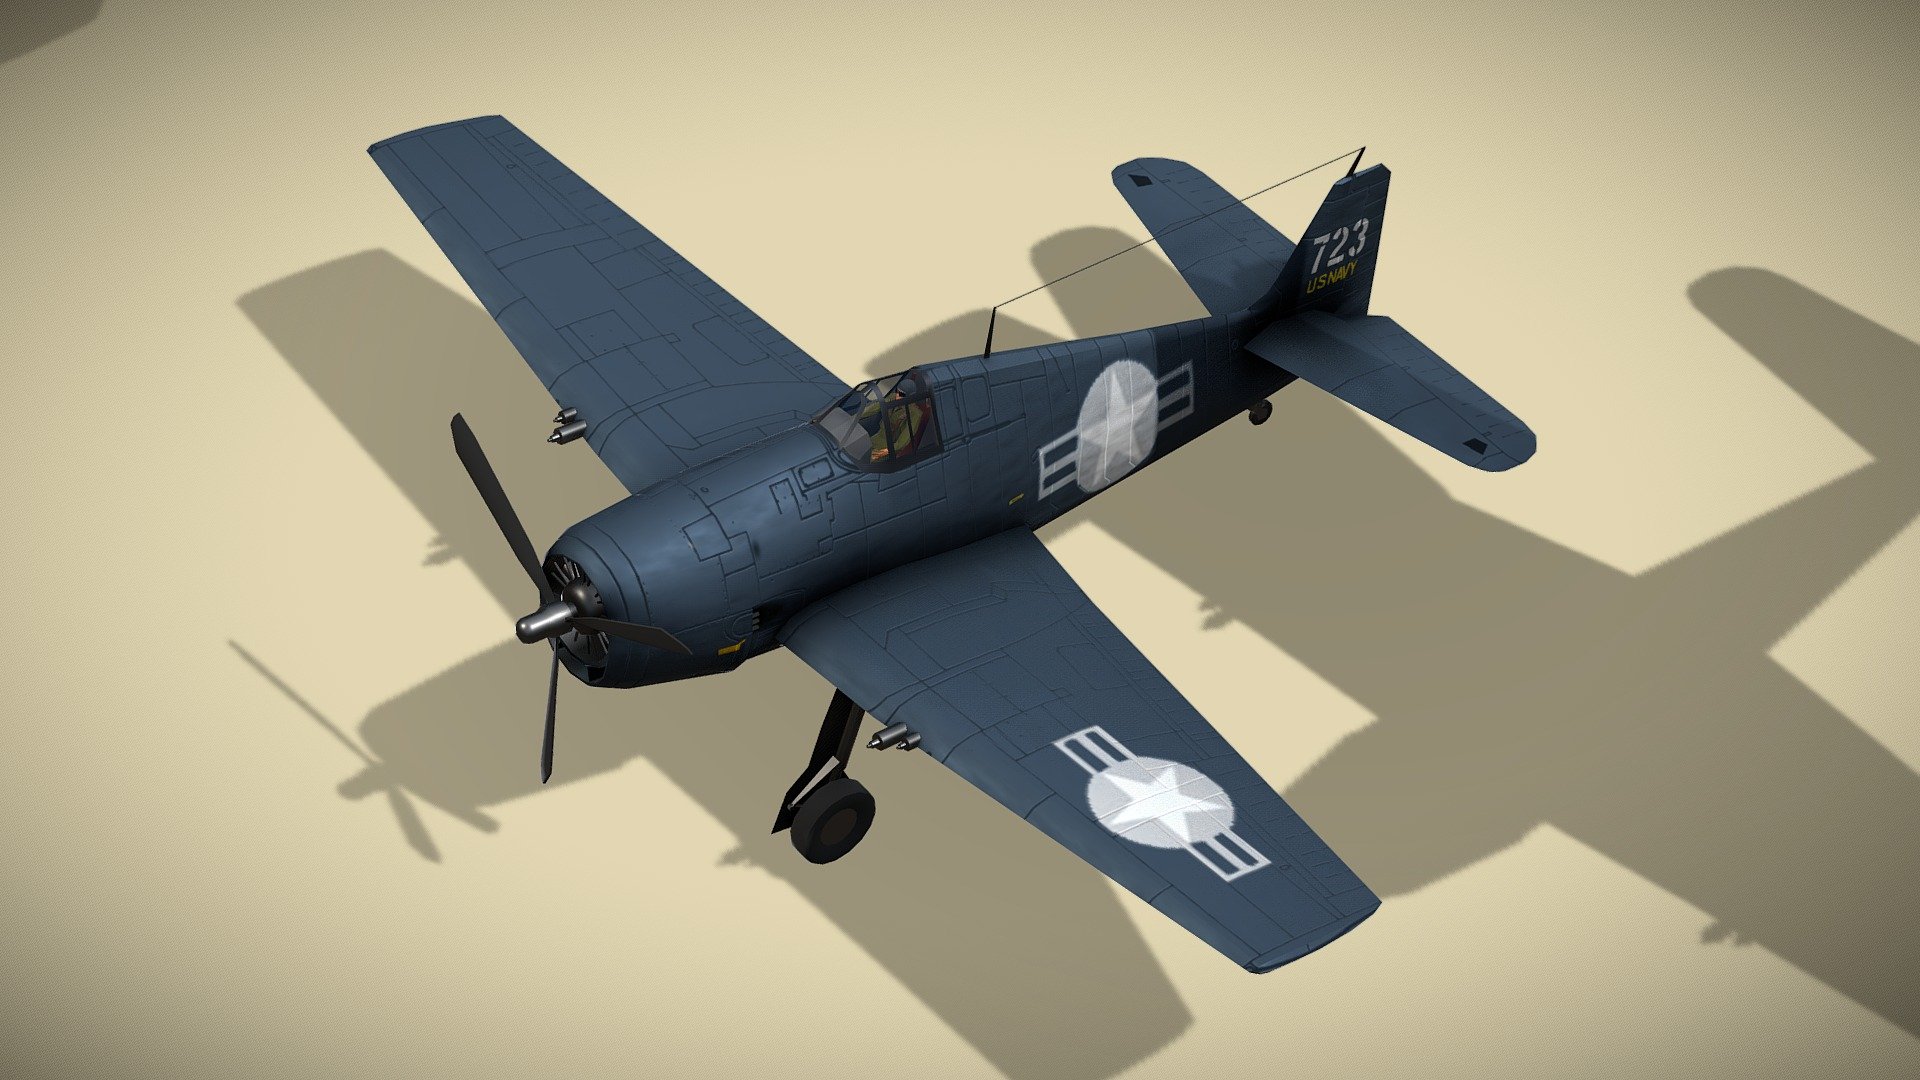 Grumman F6F Hellcat

Lowpoly model of american fighter plane from WW2



The Grumman F6F Hellcat is an American carrier-based fighter aircraft of WW II. Designed to replace the earlier F4F Wildcat and to counter the Japanese Mitsubishi A6M Zero, it was the U. S. Navy's dominant fighter in the second half of the Pacific War. In gaining that role, it prevailed over its faster competitor, the Vought F4U Corsair, which initially had problems with visibility and carrier landings.

The F6F made its combat debut in September 1943, and was best known for its role as a rugged, well-designed carrier fighter, which was able to outperform the A6M Zero and help secure air superiority over the Pacific.



1 standing version with wheels and 2 flying versions with trails, pilot and armament.

Model has bump map, roughness map and 3 x diffuse textures



Check also my other aircrafts and cars.

Patreon with monthly free model - Grumman F6F Hellcat - Buy Royalty Free 3D model by NETRUNNER_pl 3d model